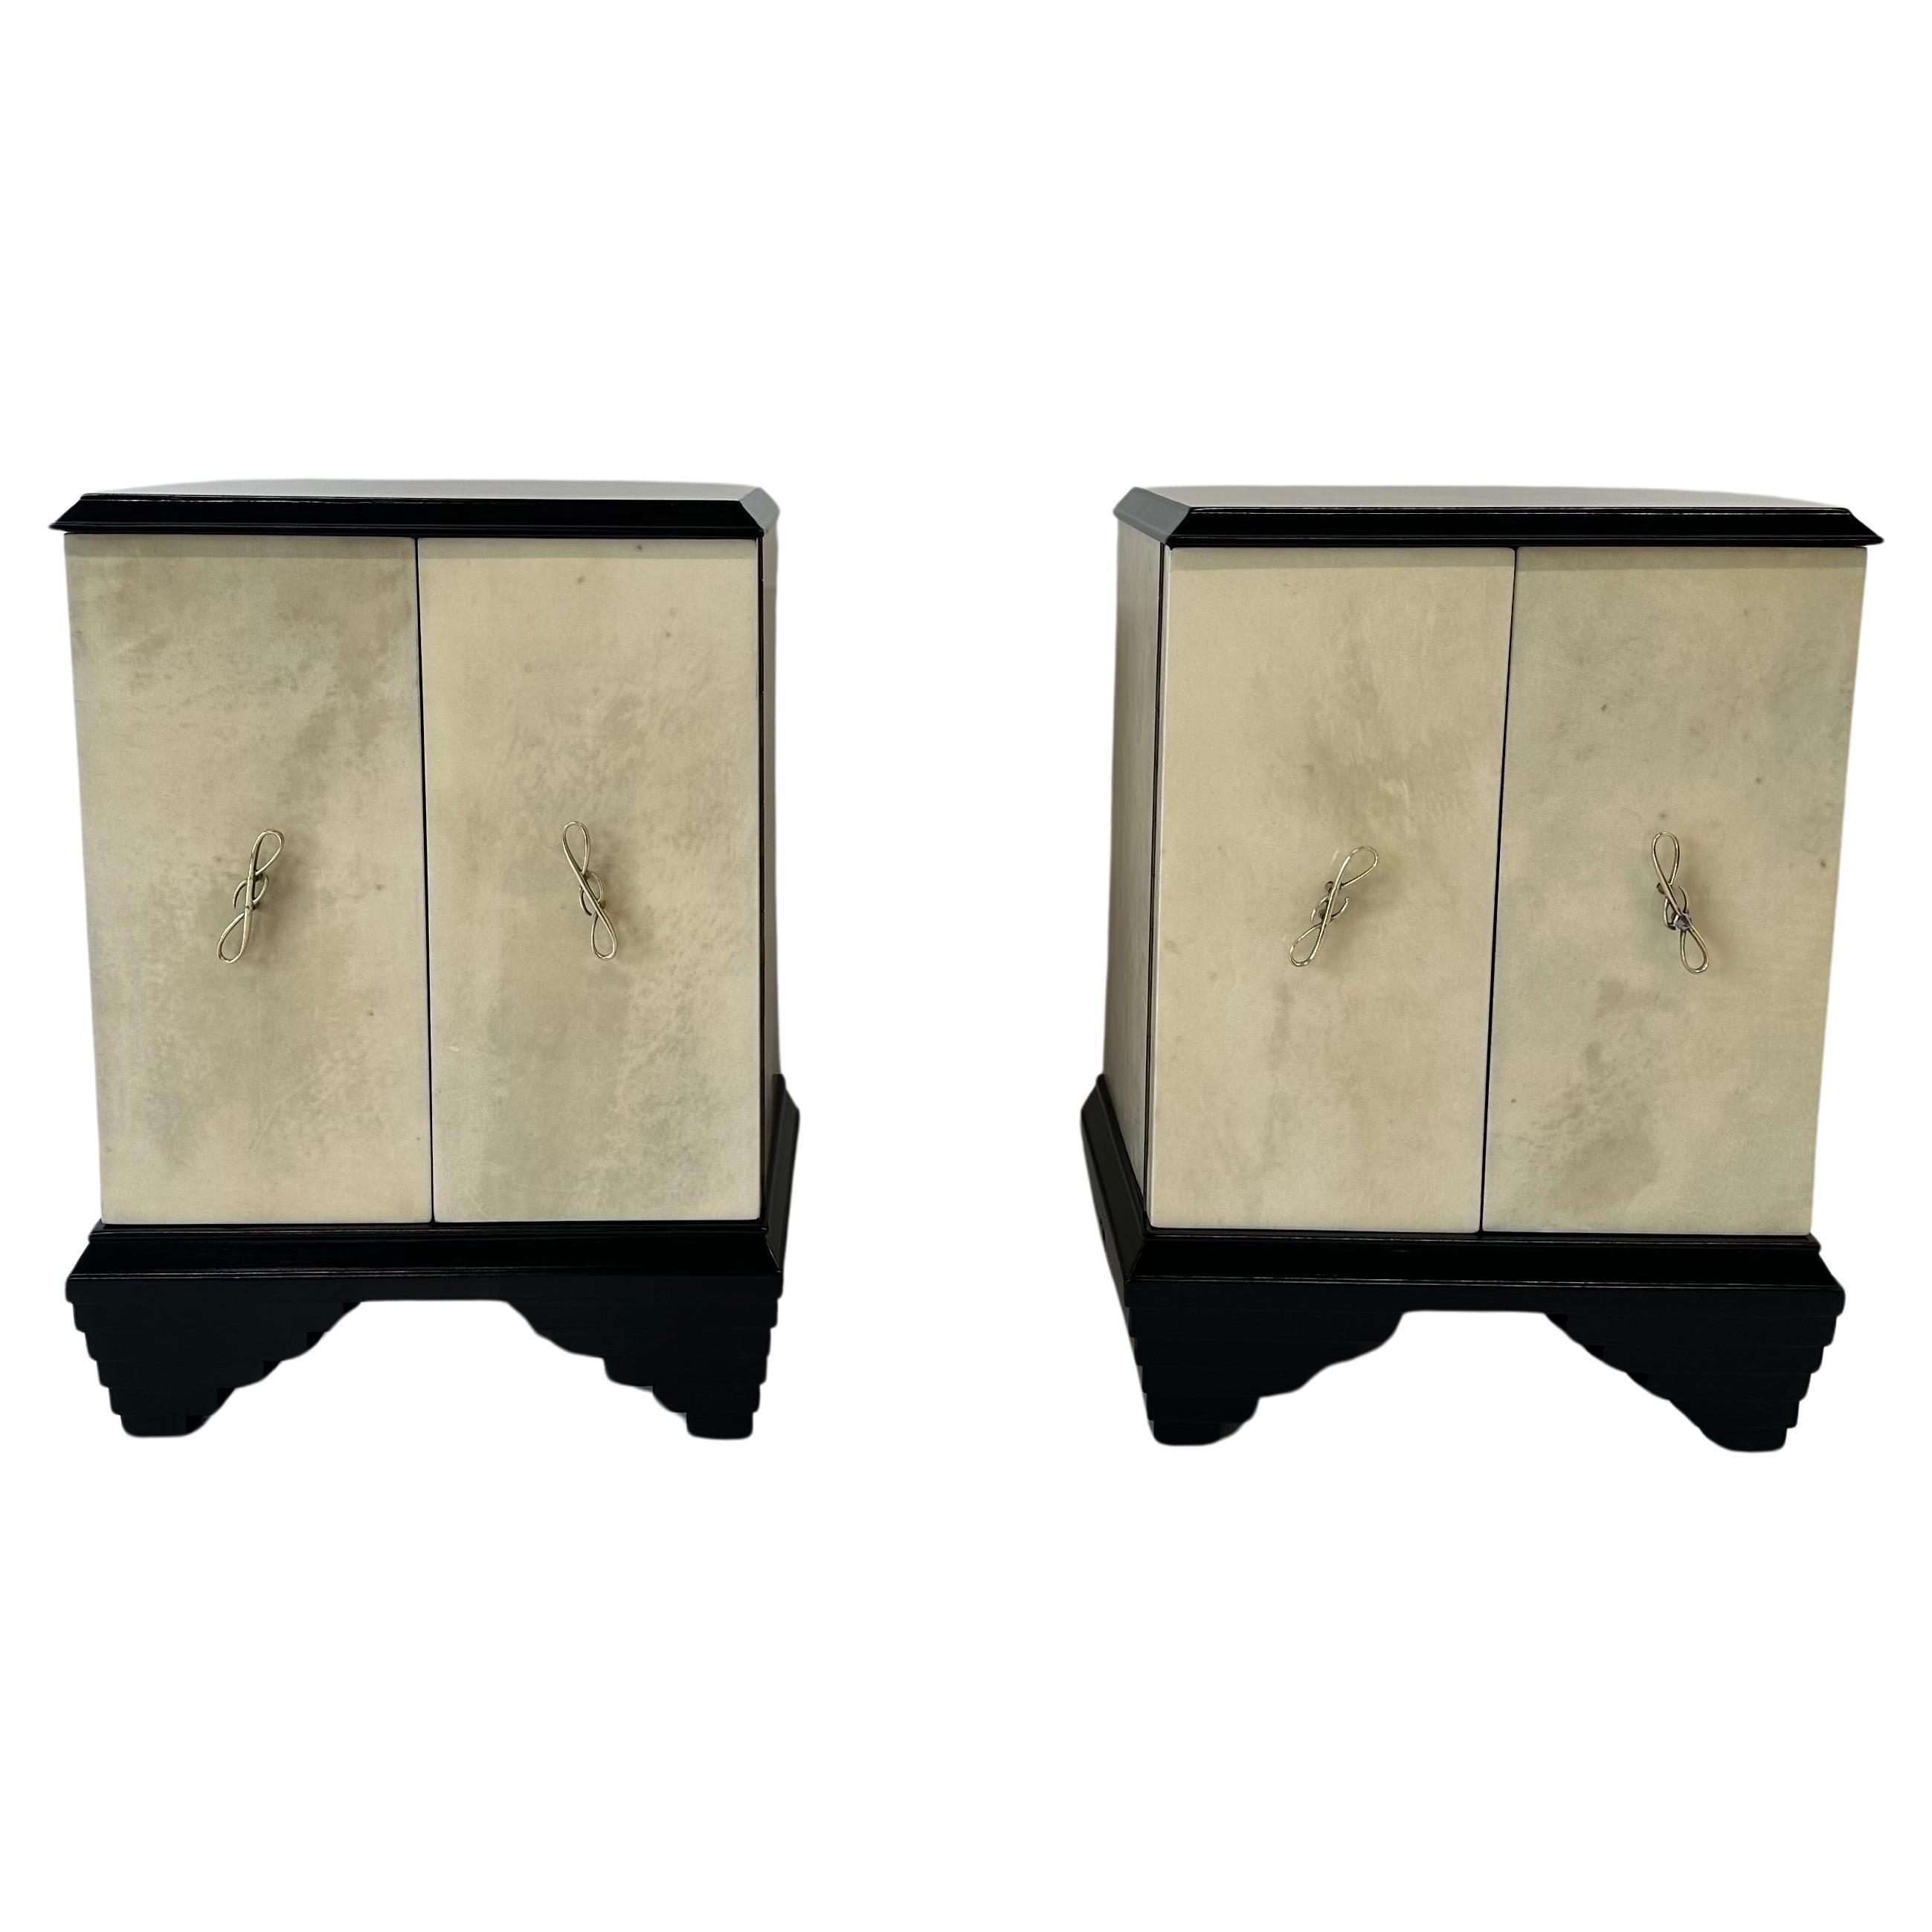 Italian Art Deco Parchment and Black Lacquer Pair of Nightstands, 1930s 